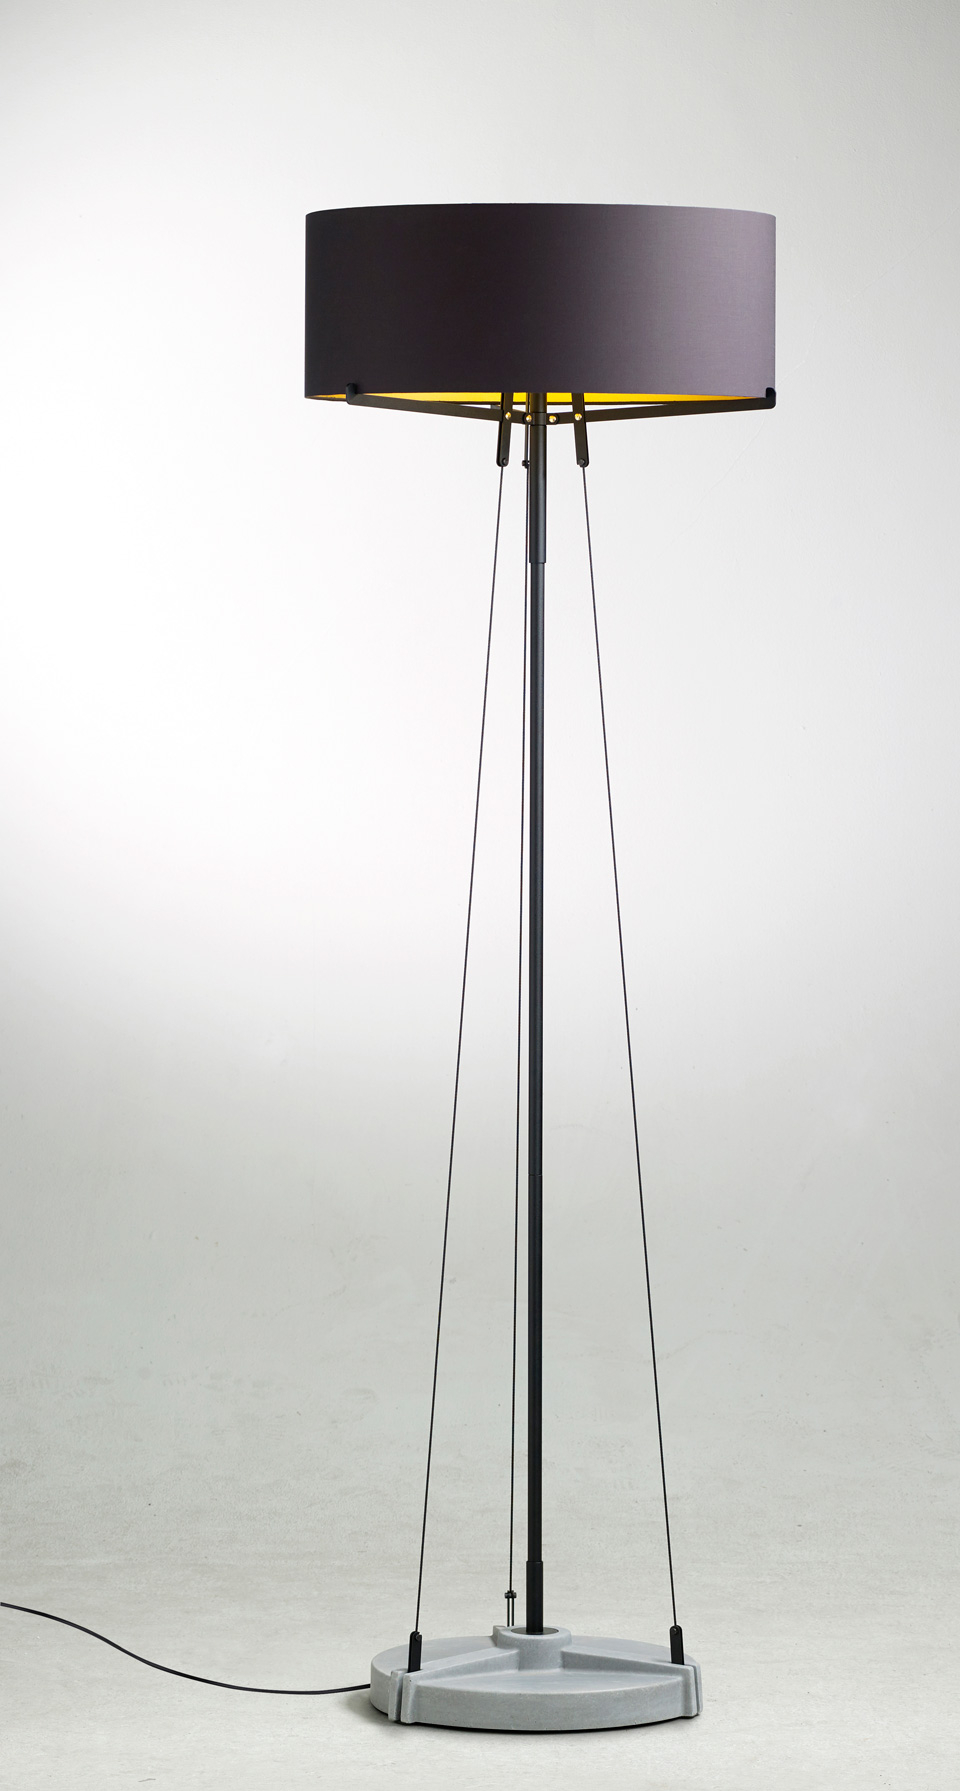 Matt Black Floor Lamp Nearly 2m Tall Stayed With 3 Guys Anchored On A Steel Base with regard to size 960 X 1791